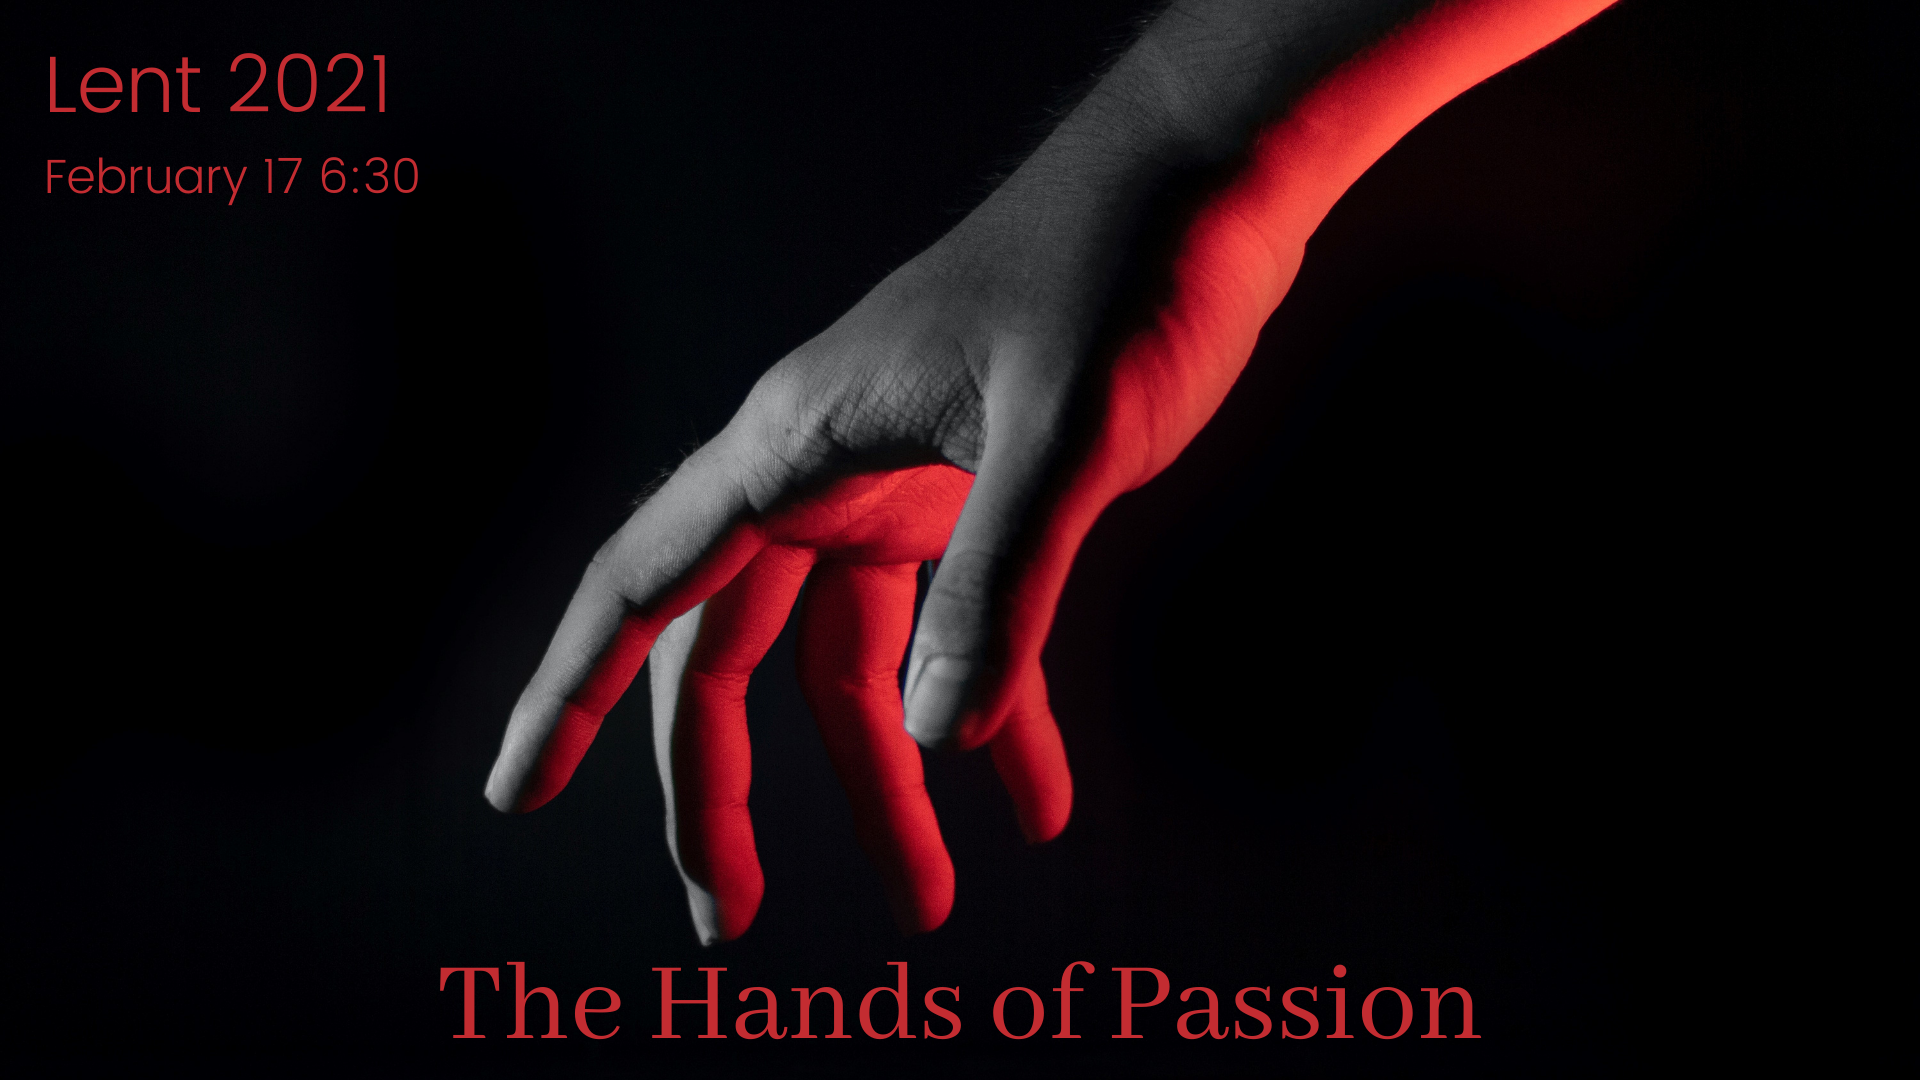 The Hands of Passion